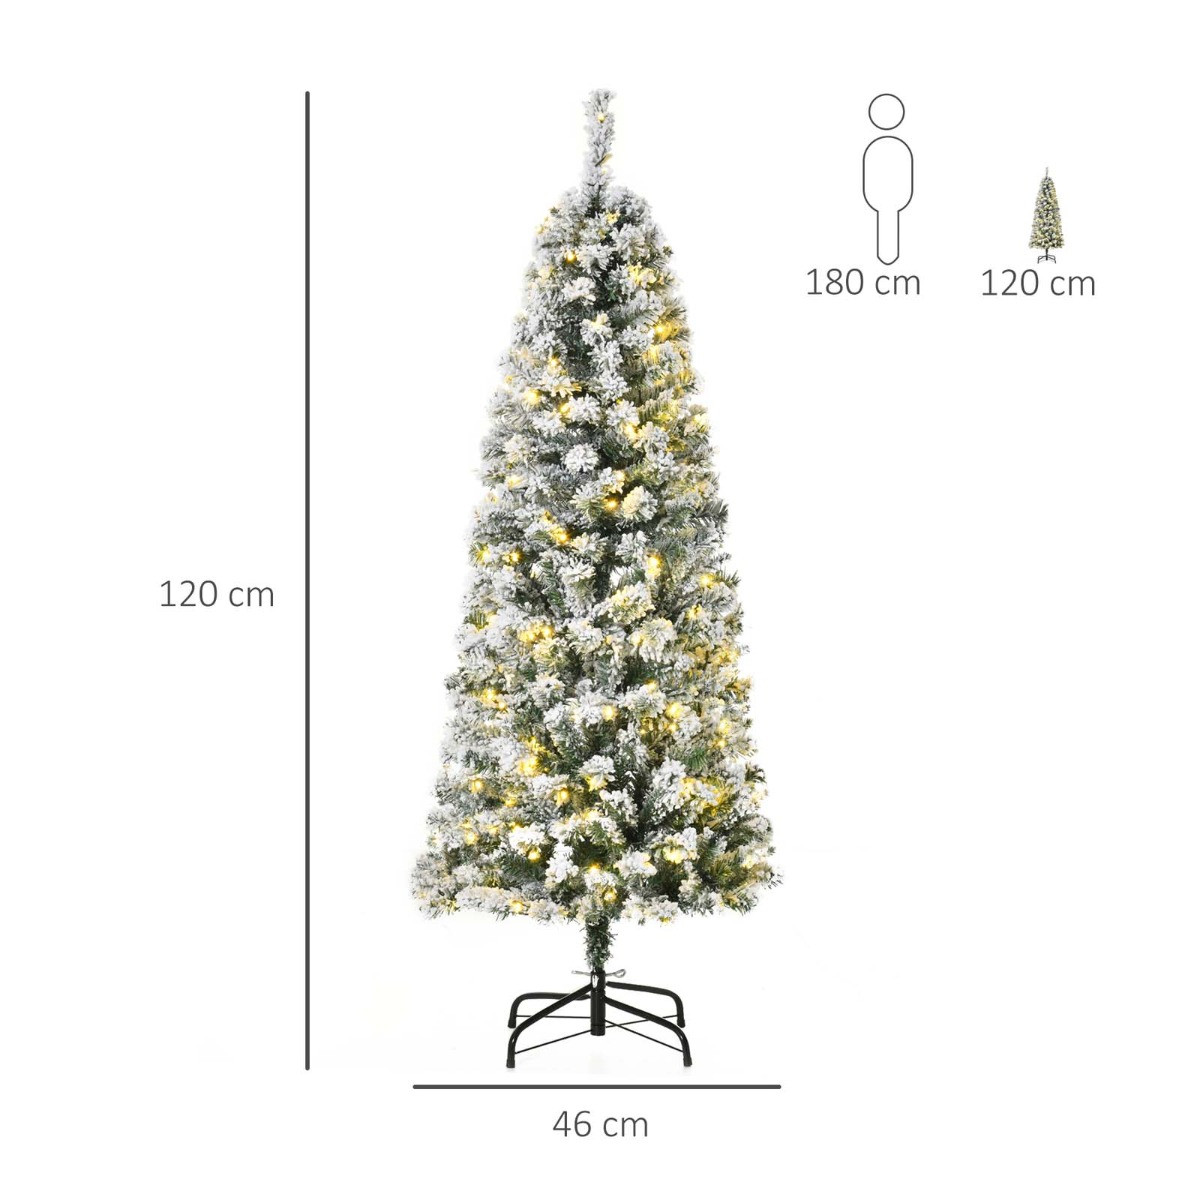 OHS Pre-Lit Artificial Snow Flocked Christmas Tree With Warm LED Lights, Green/White - 4ft>